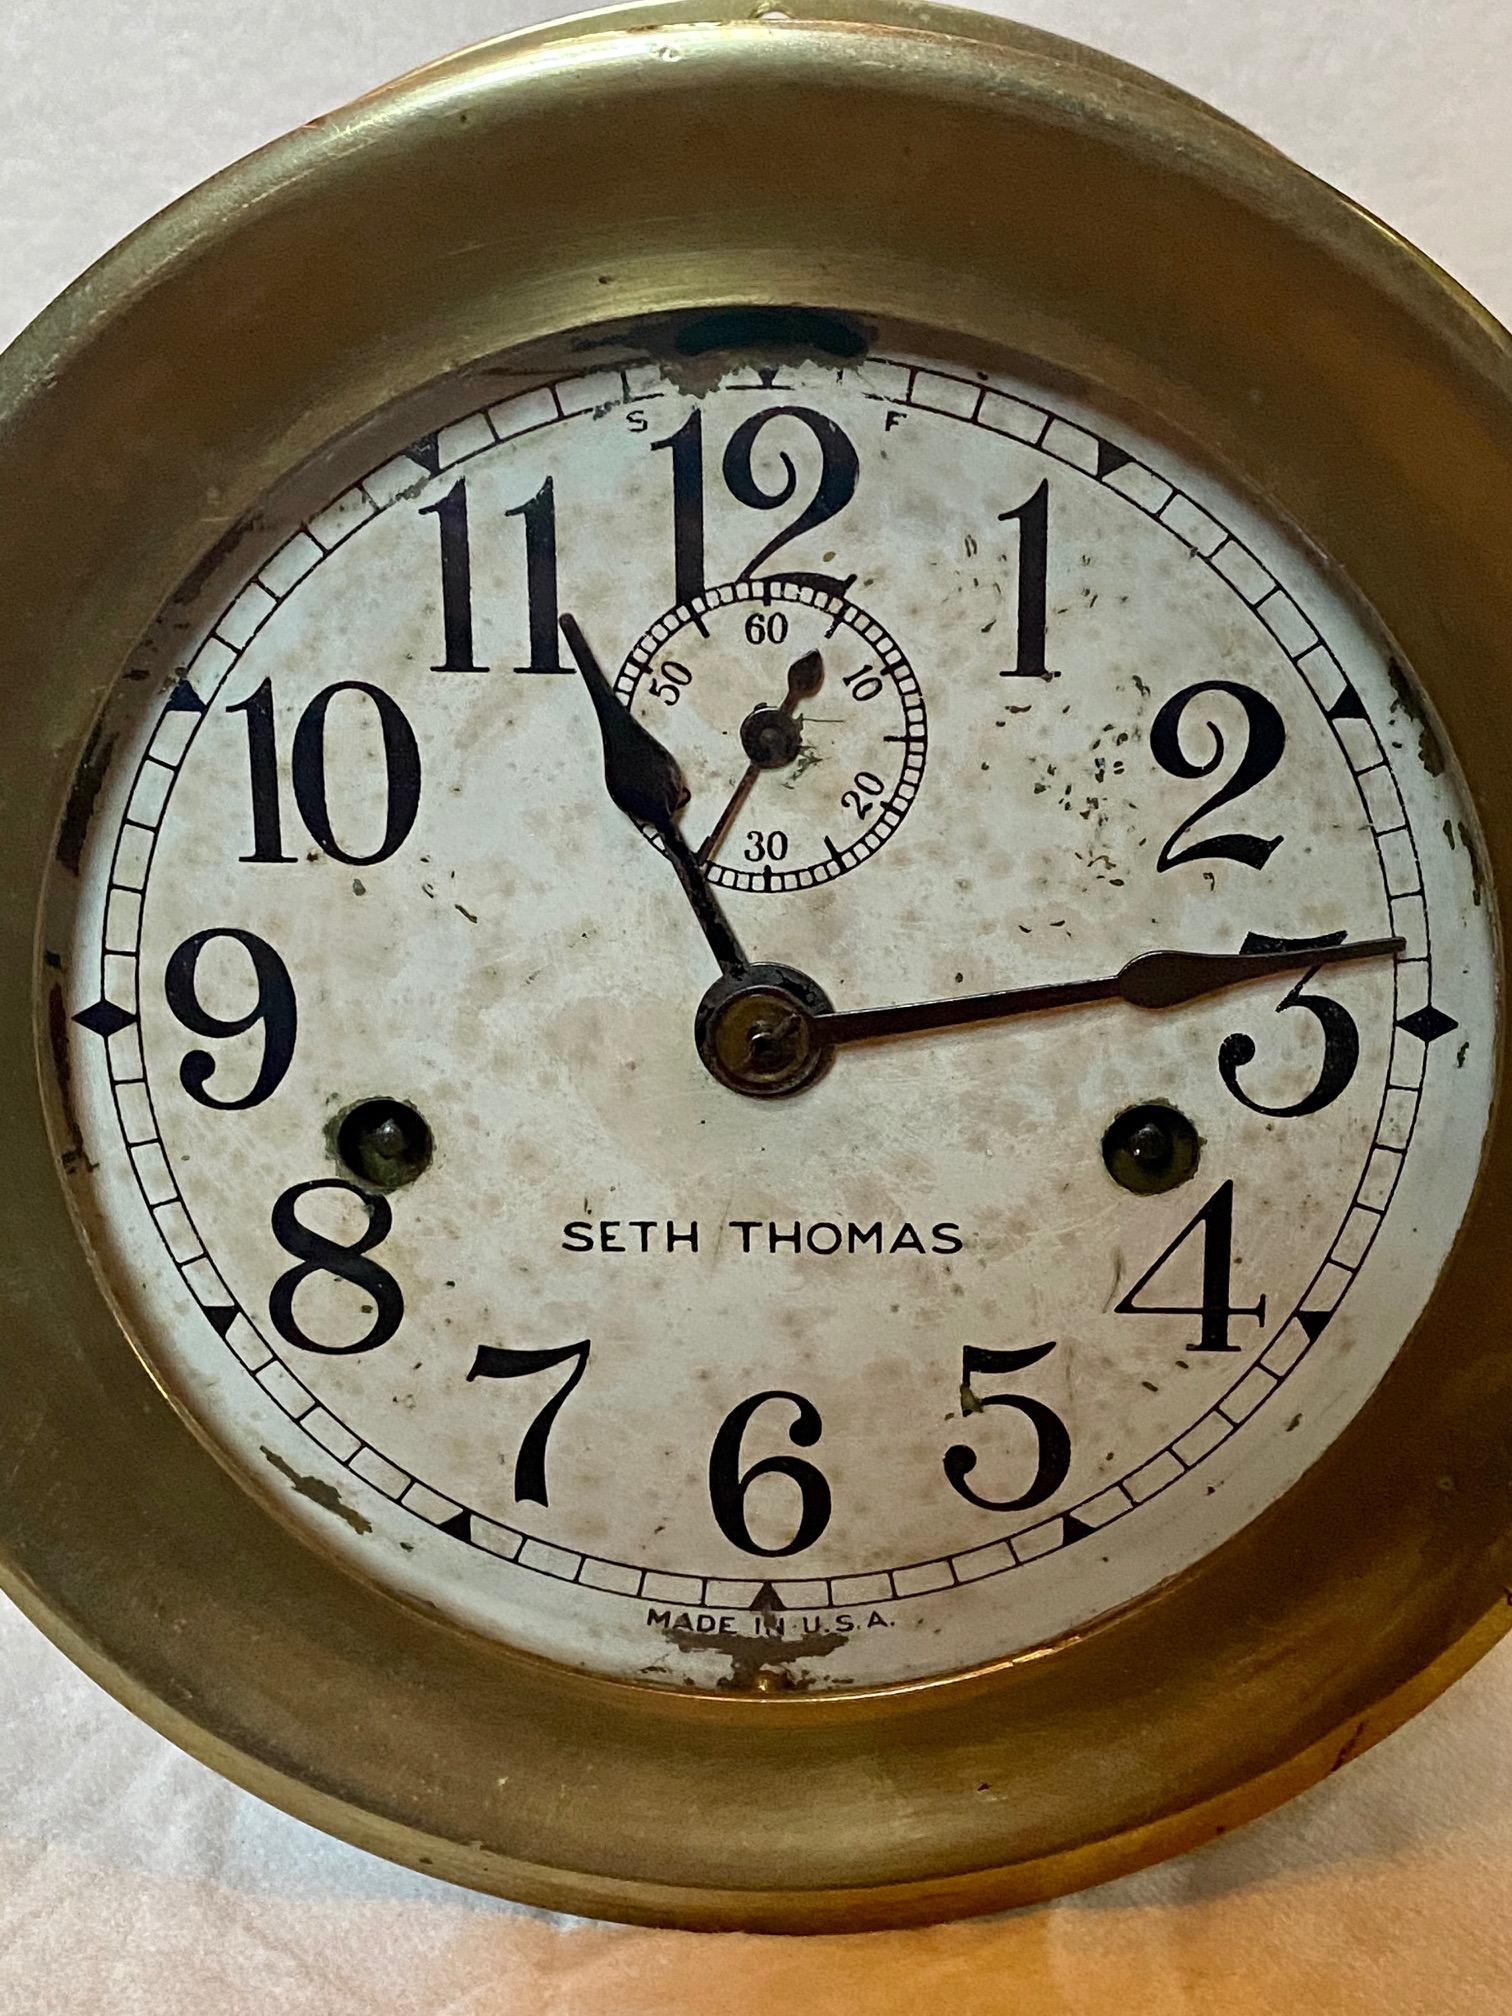 Early Seth Thomas brass ship's engine room clock, circa 1920, with No. 10 Lever Movement, double key wind time only clock, the 5 1/2 inch white painted metal dial having black Arabic numerals, hour and minute hands and a separate smaller sweep